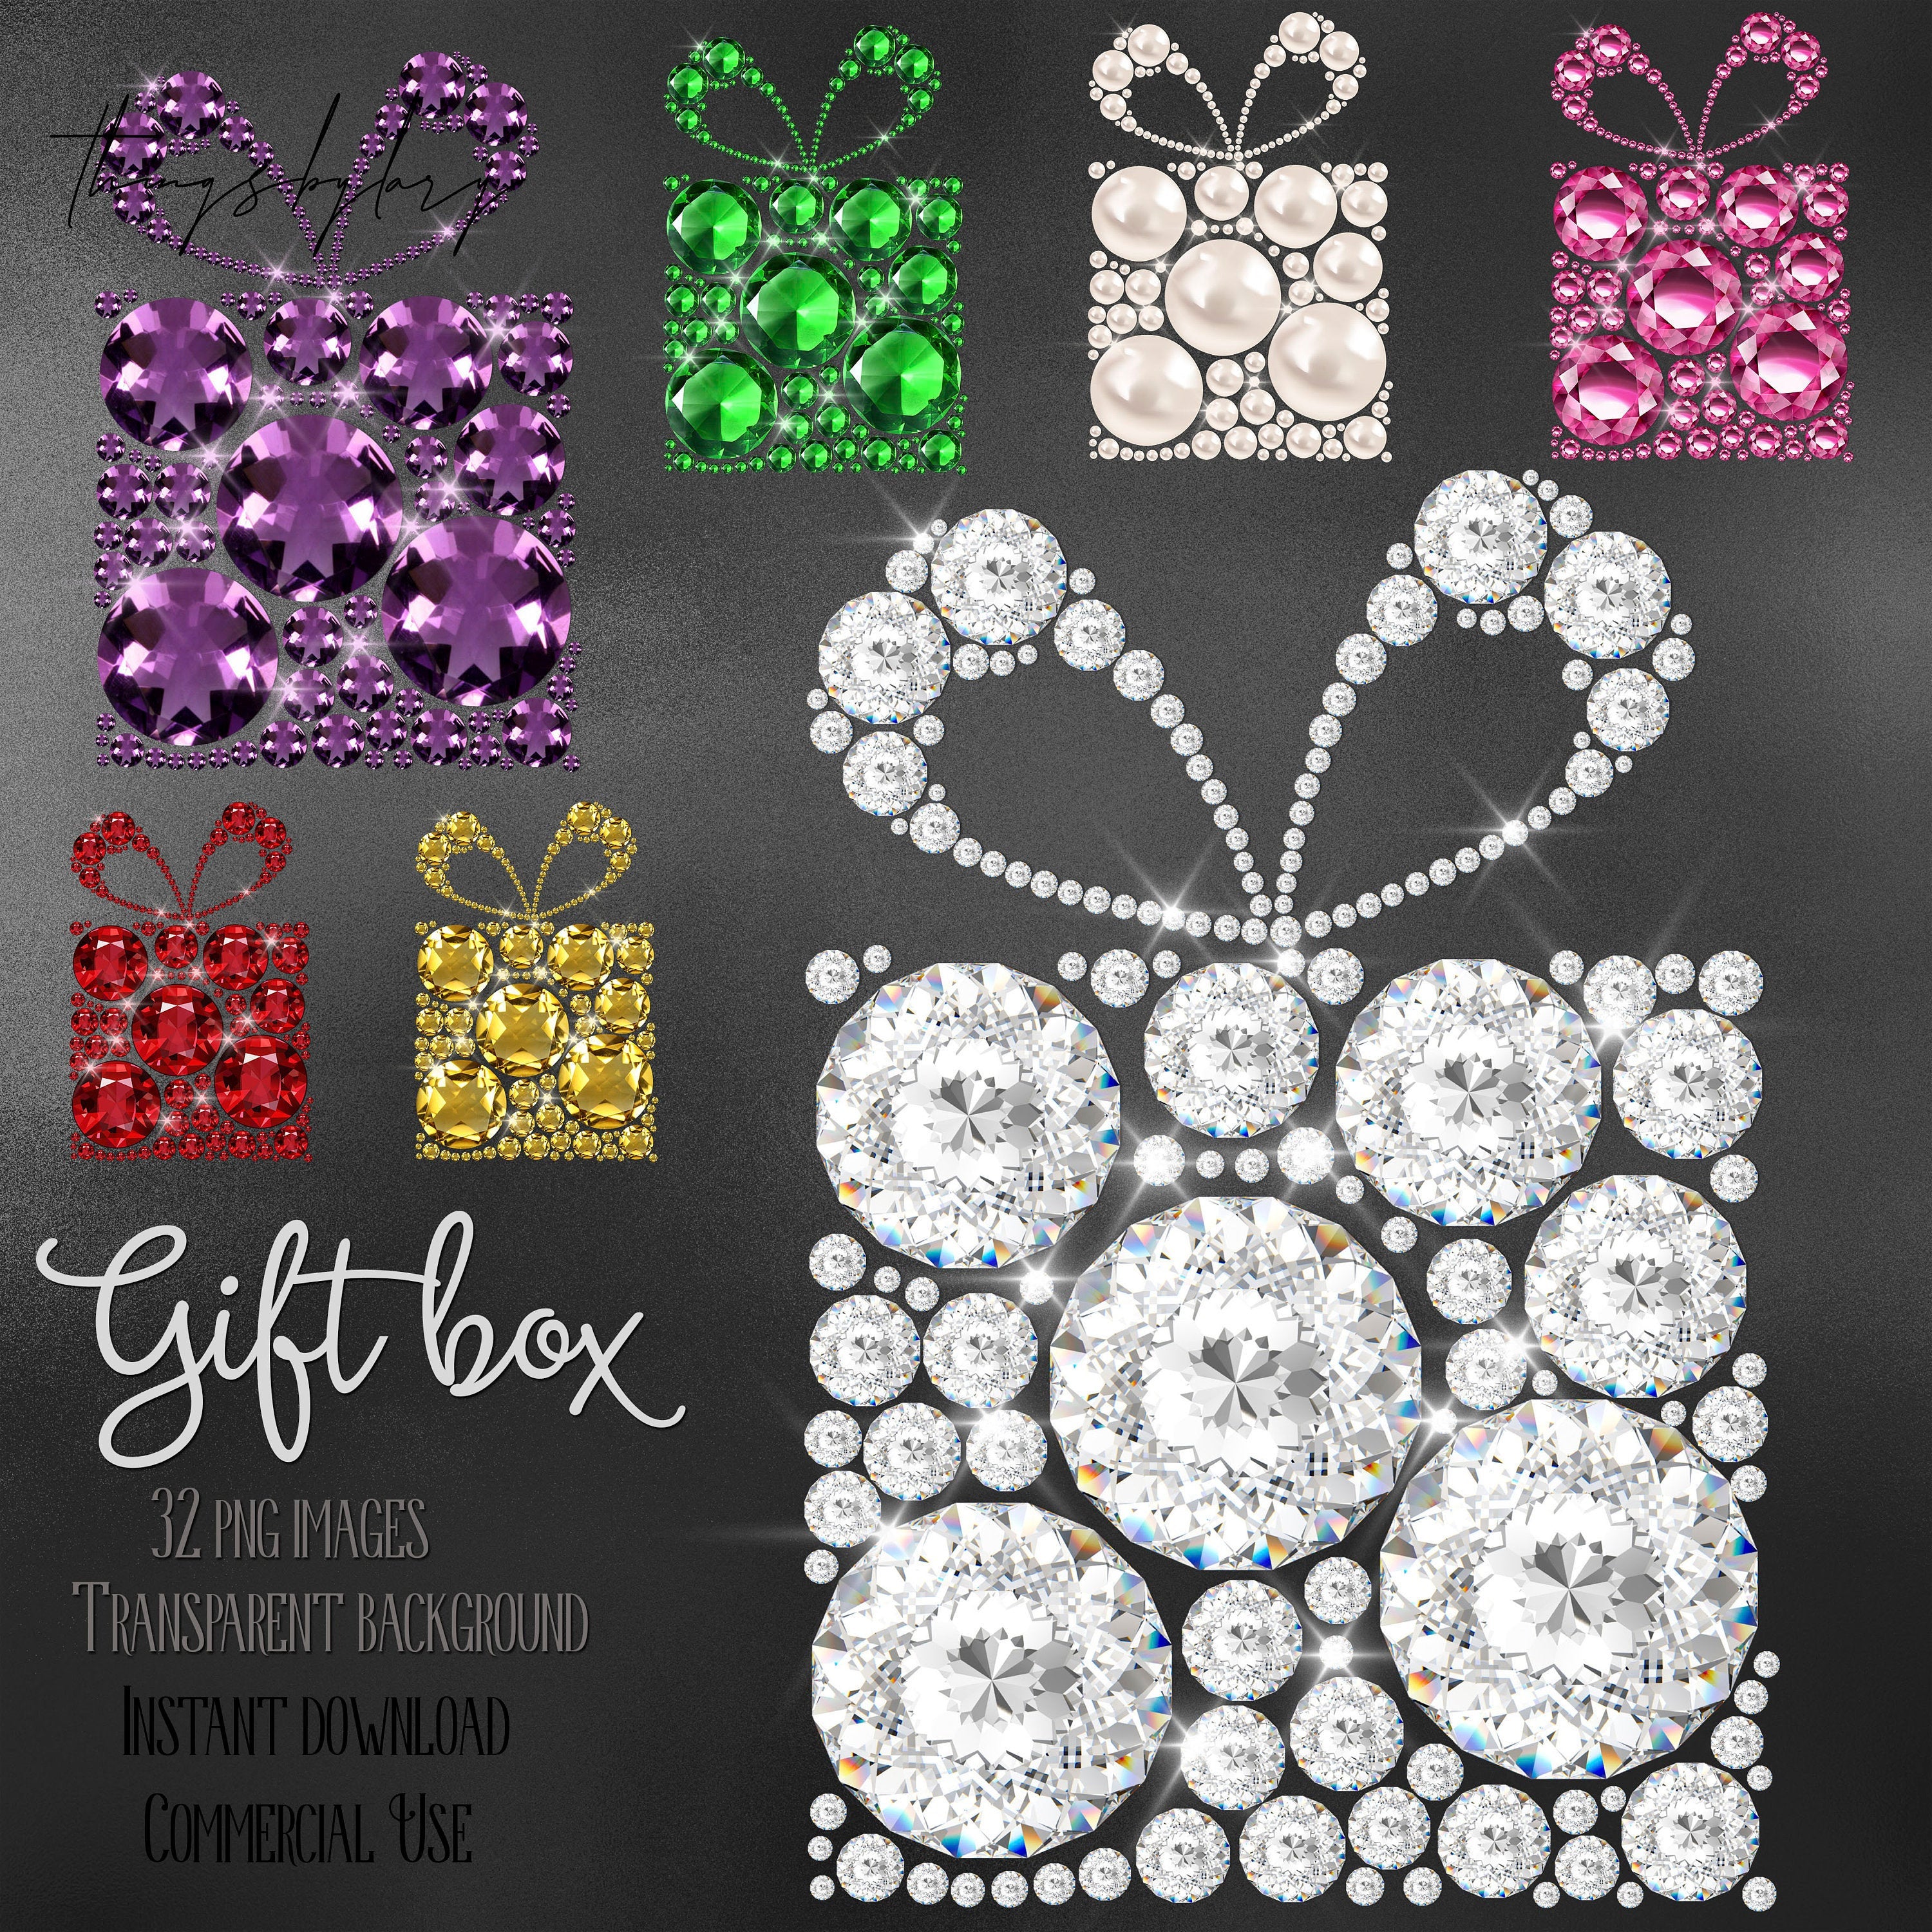 32 Diamond Pearl Gemstone Rhinestone Jewelry Gift Box Clip Arts Digital Images 300 Dpi PNG Instant Download Commercial Use Realistic Diamond